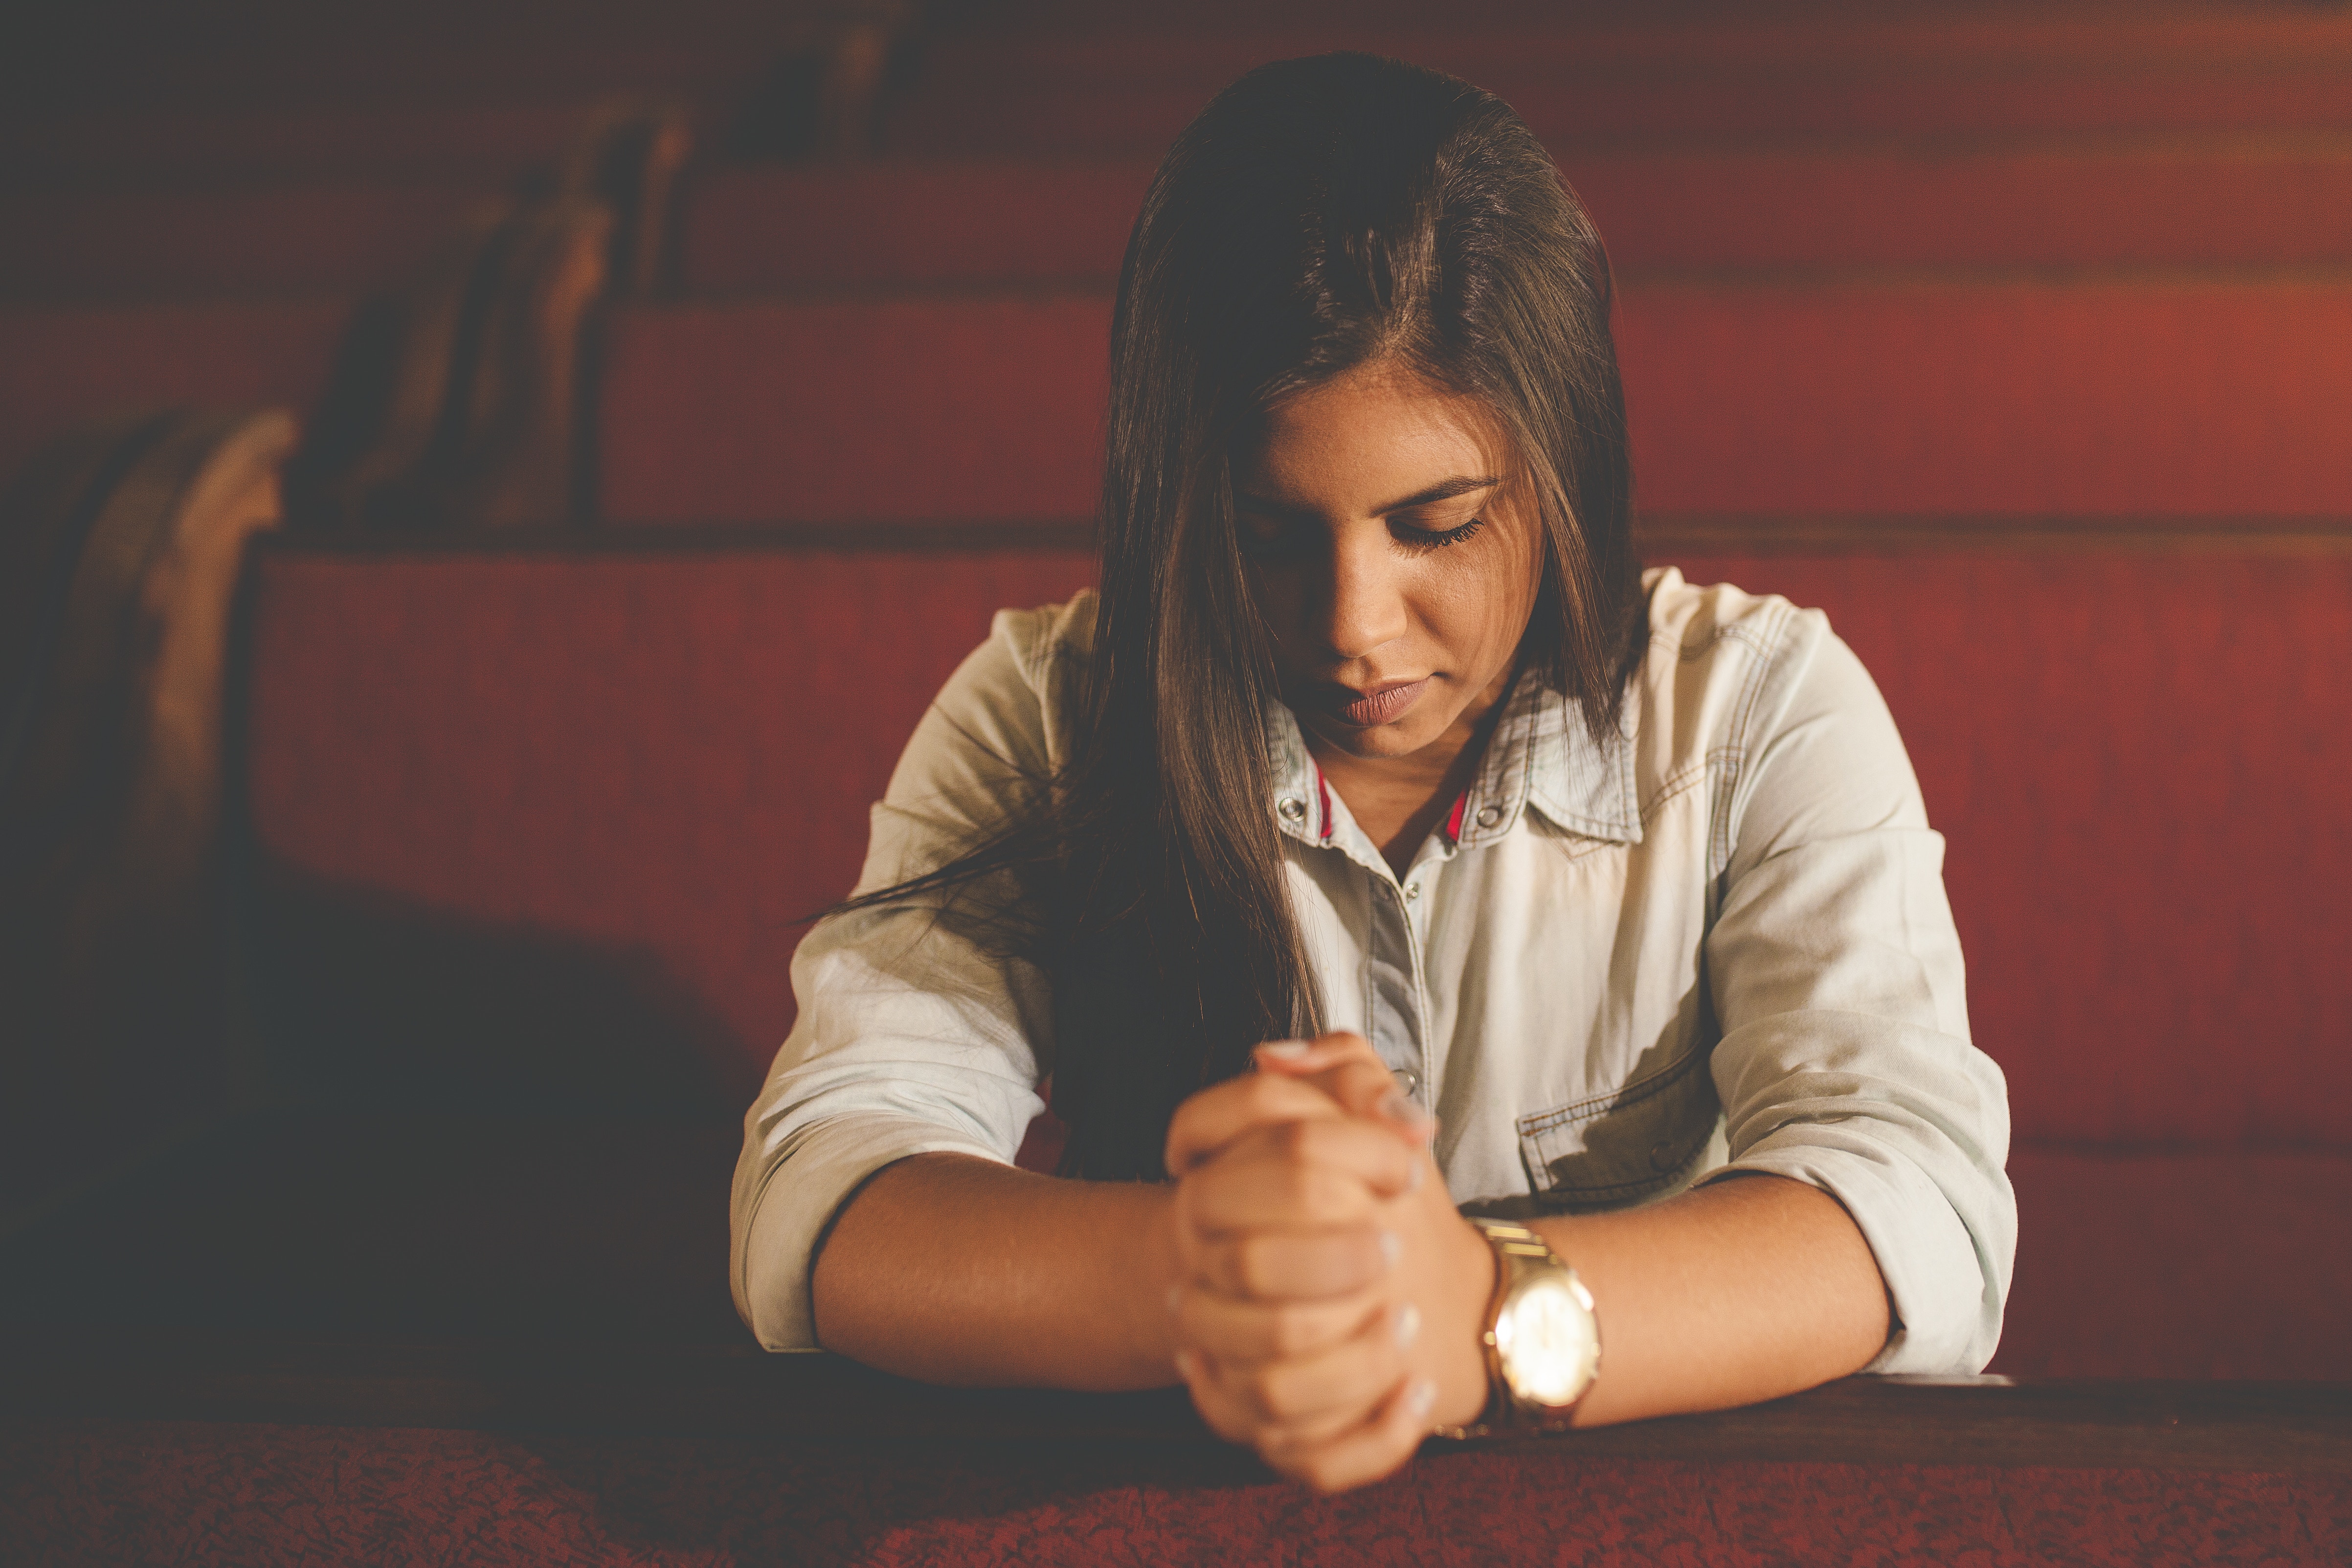 Young woman praying in a church pew